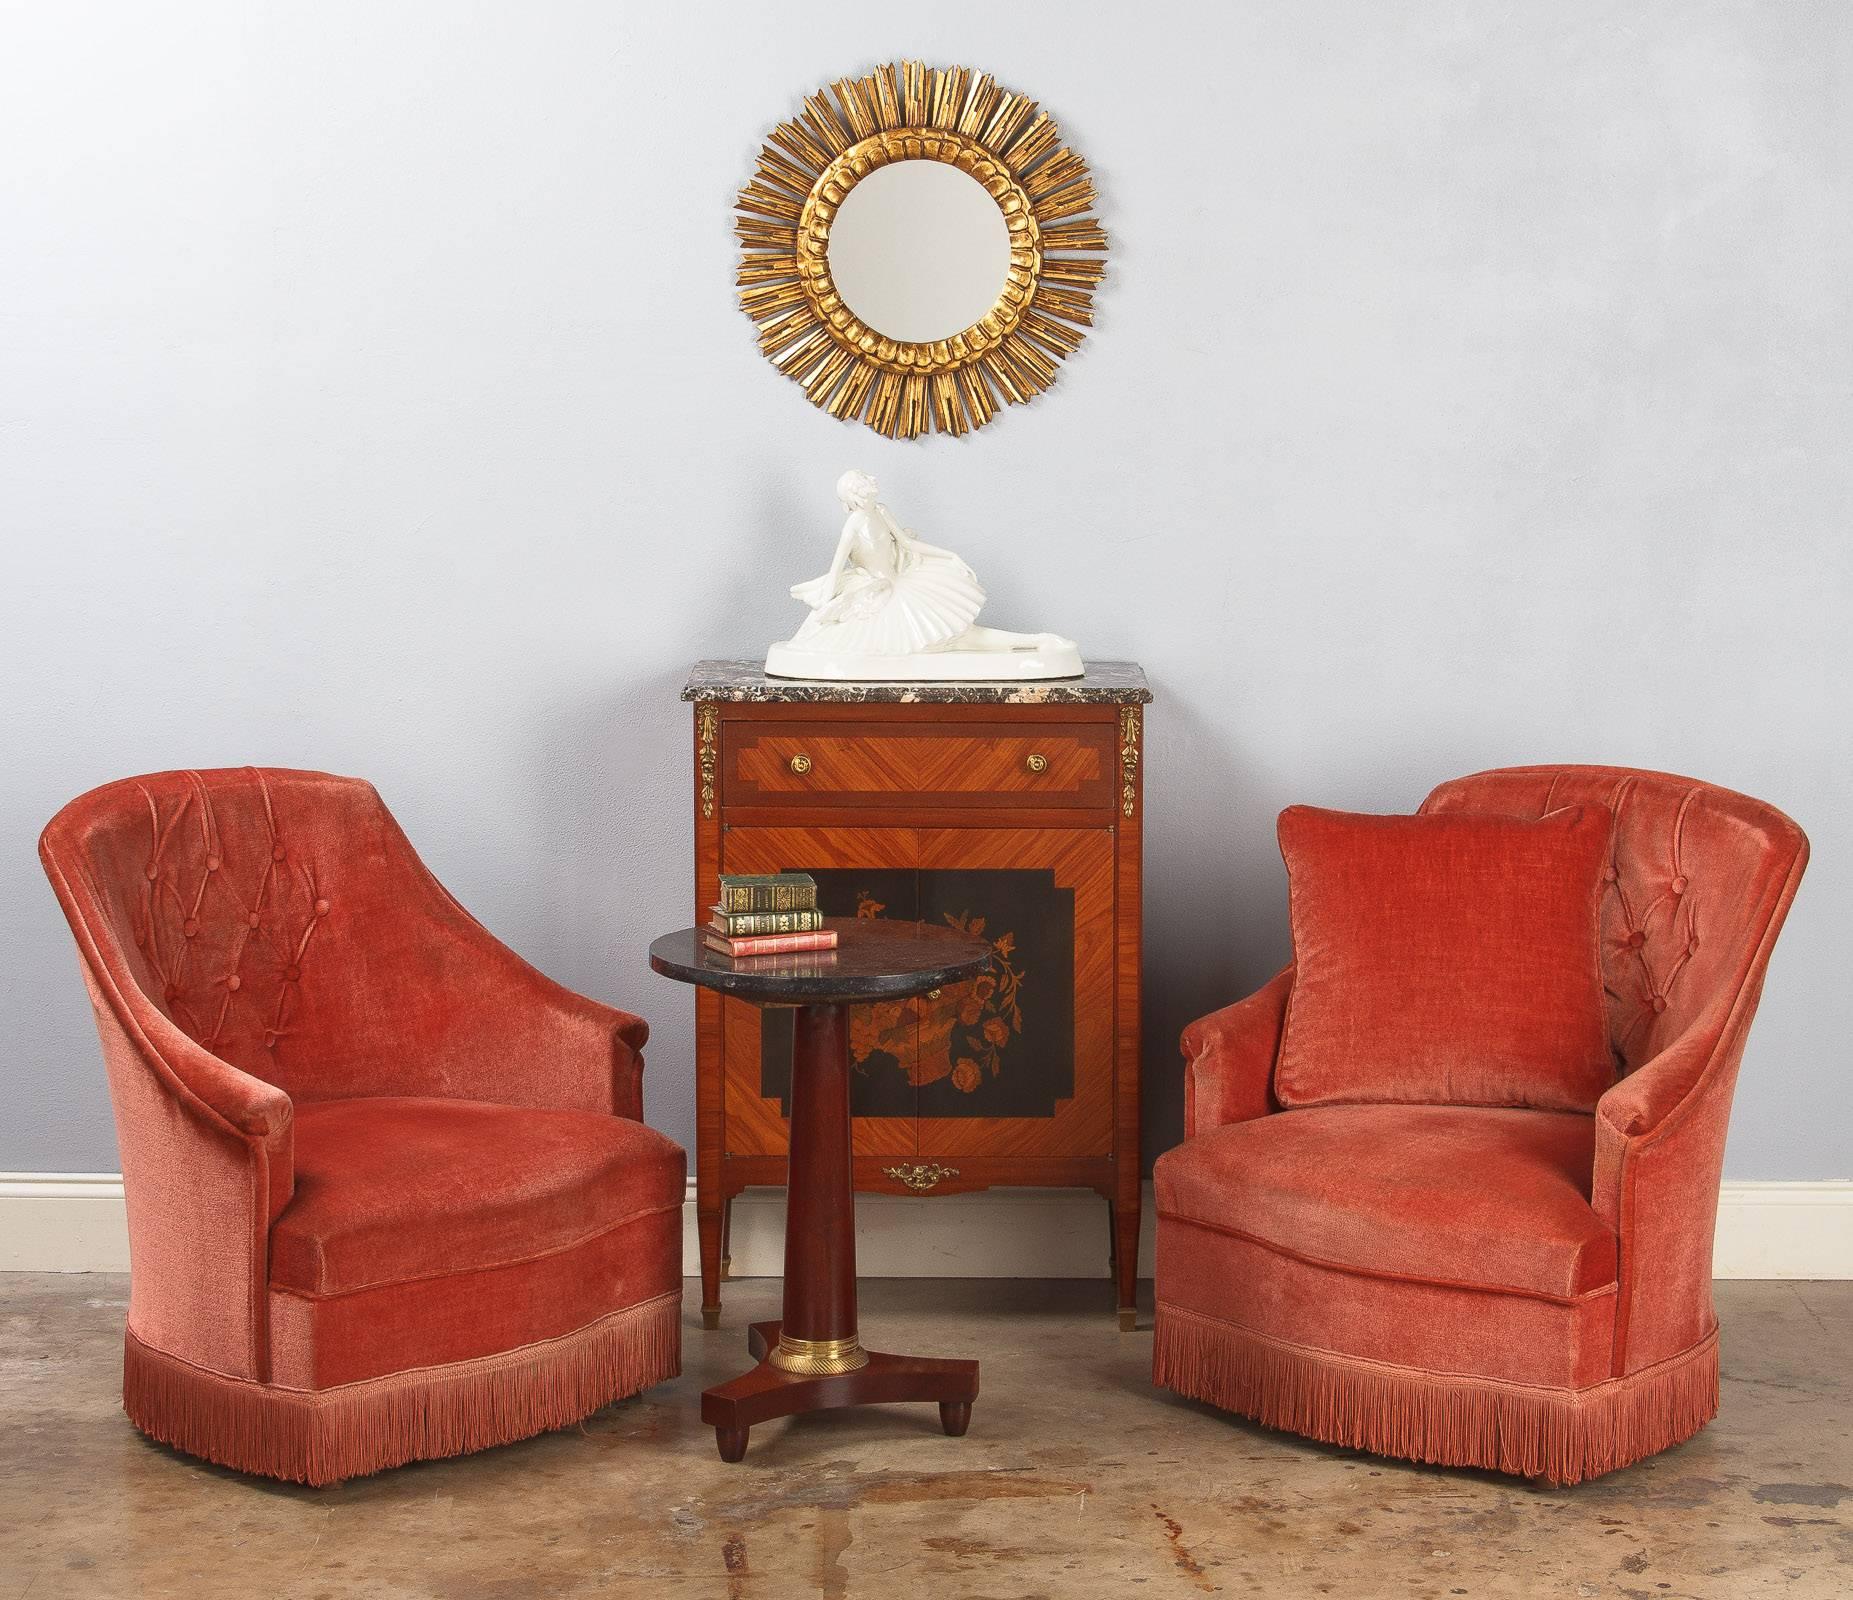 A pair of Napoleon III style Boudoir armchairs, called "Crapauds," lined in velvet fabric in rose tones with tufted rounded backs. Fringes around the apron are hiding wooden feet. Small size armchairs but quite comfortable. From floor to